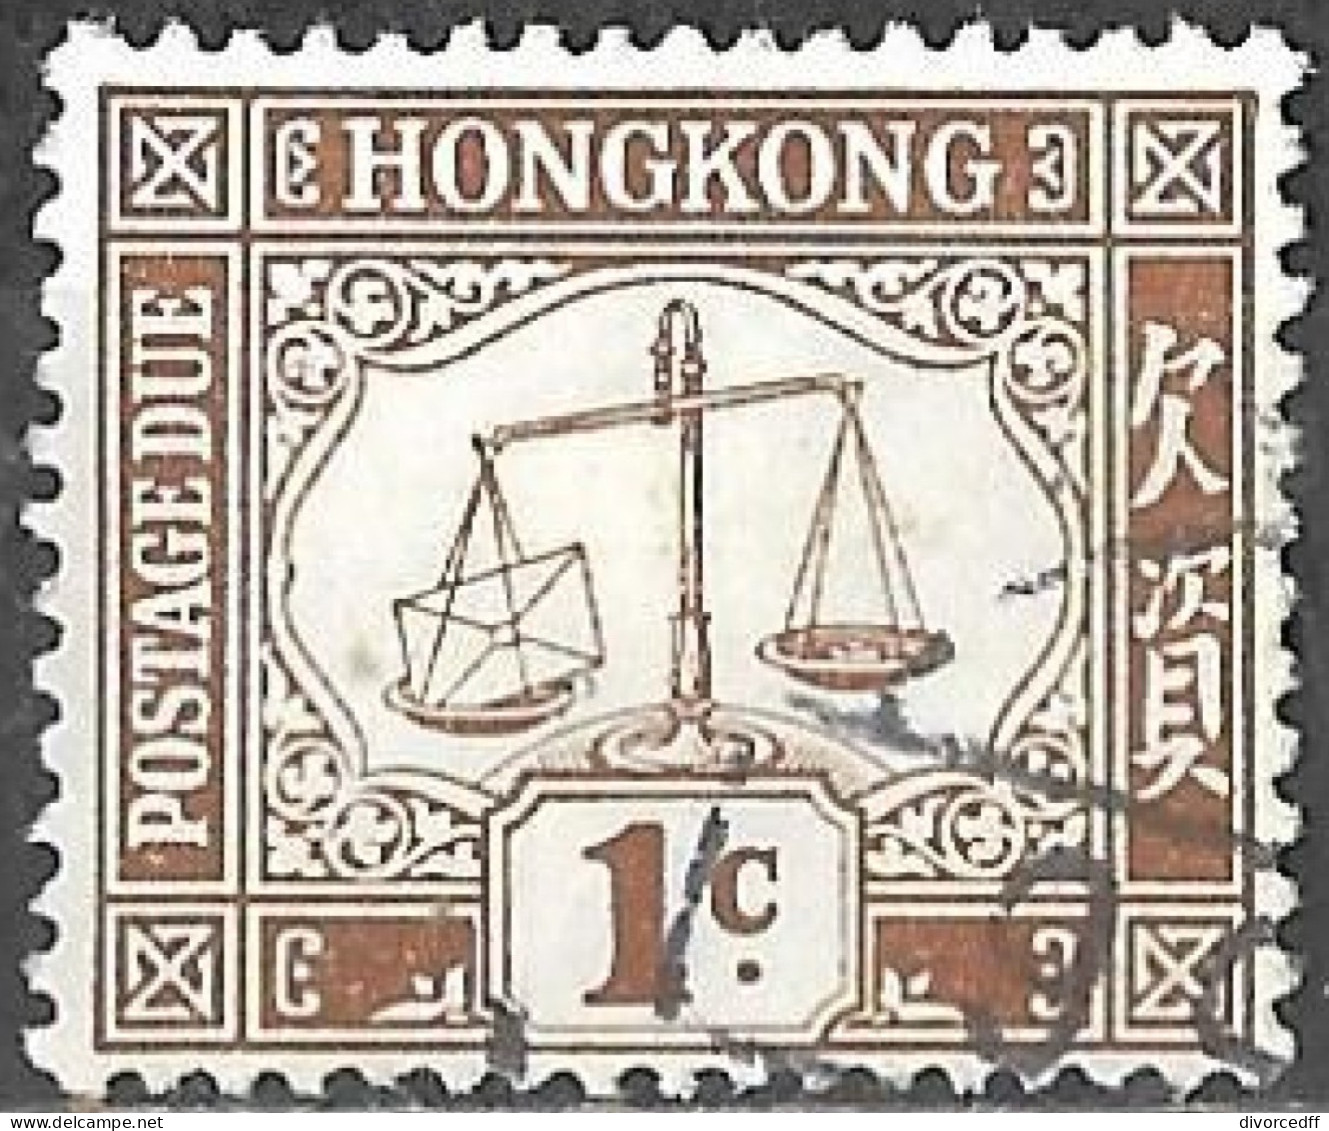 Hong Kong Used Postage Due Stamp Scales Showing Letter Overweight 1 Cent [WLT283] - Segnatasse